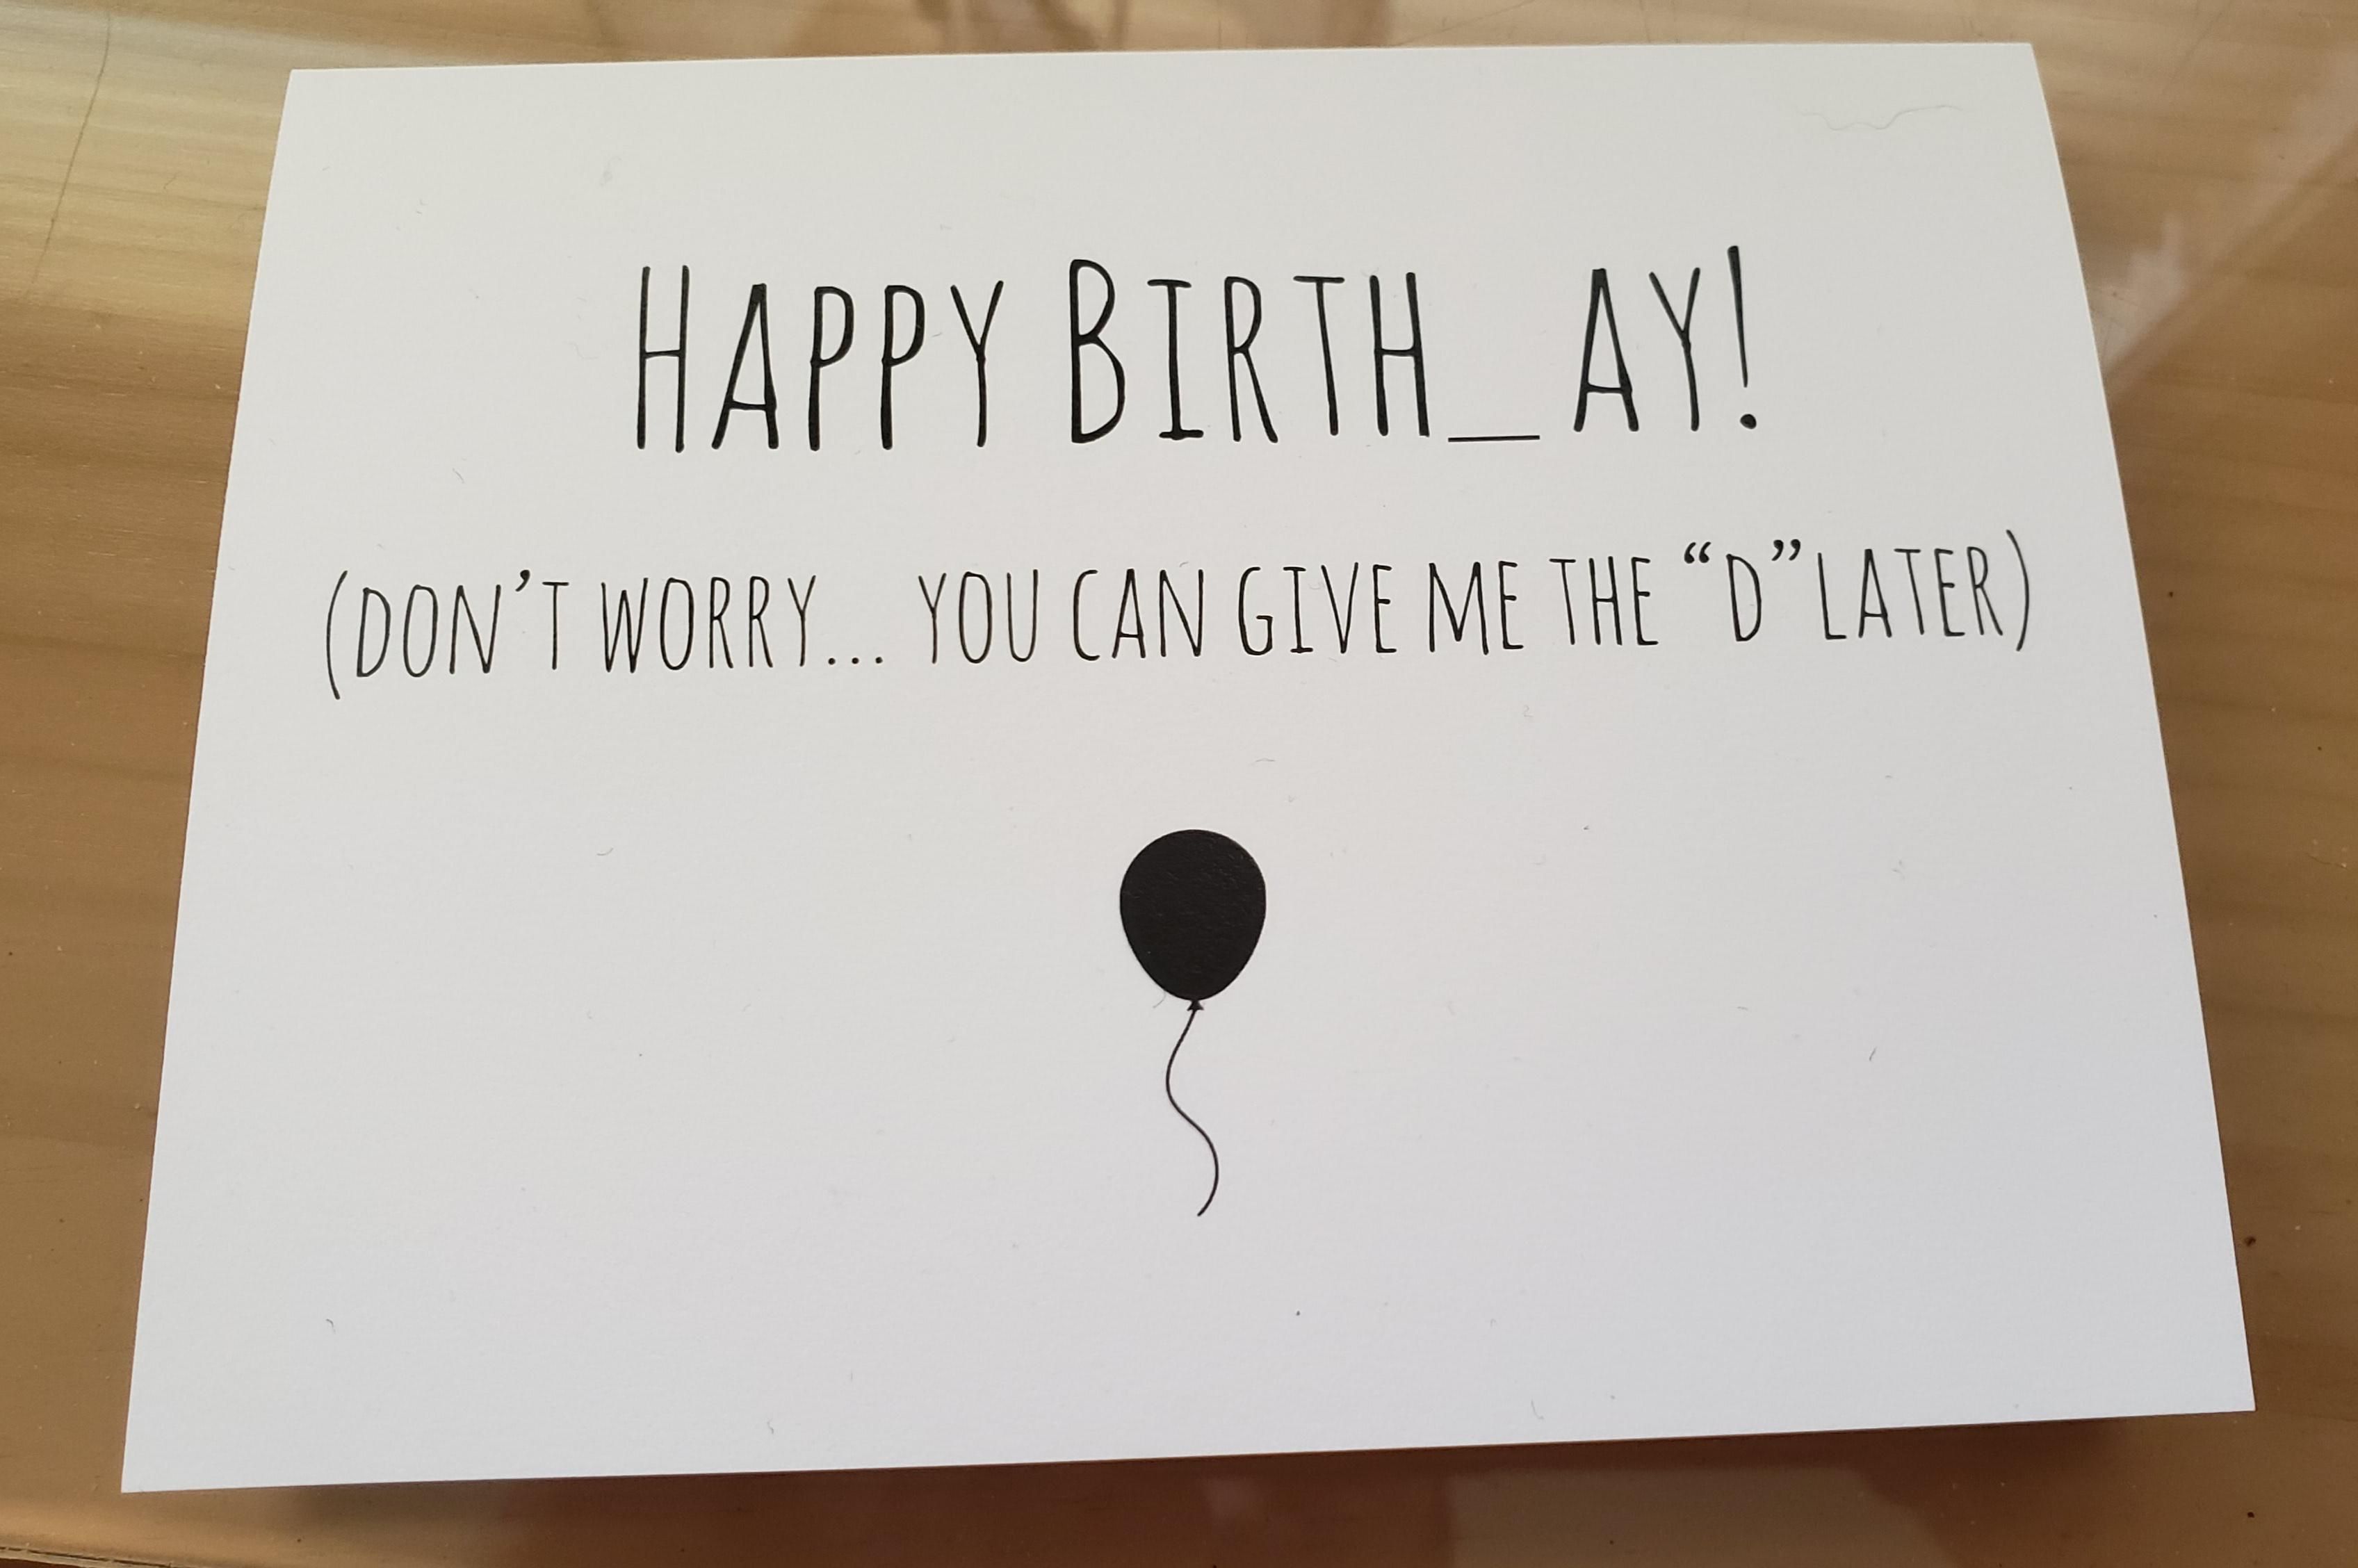 Today is my 43rd birthday. My wife gave me this card at breakfast.